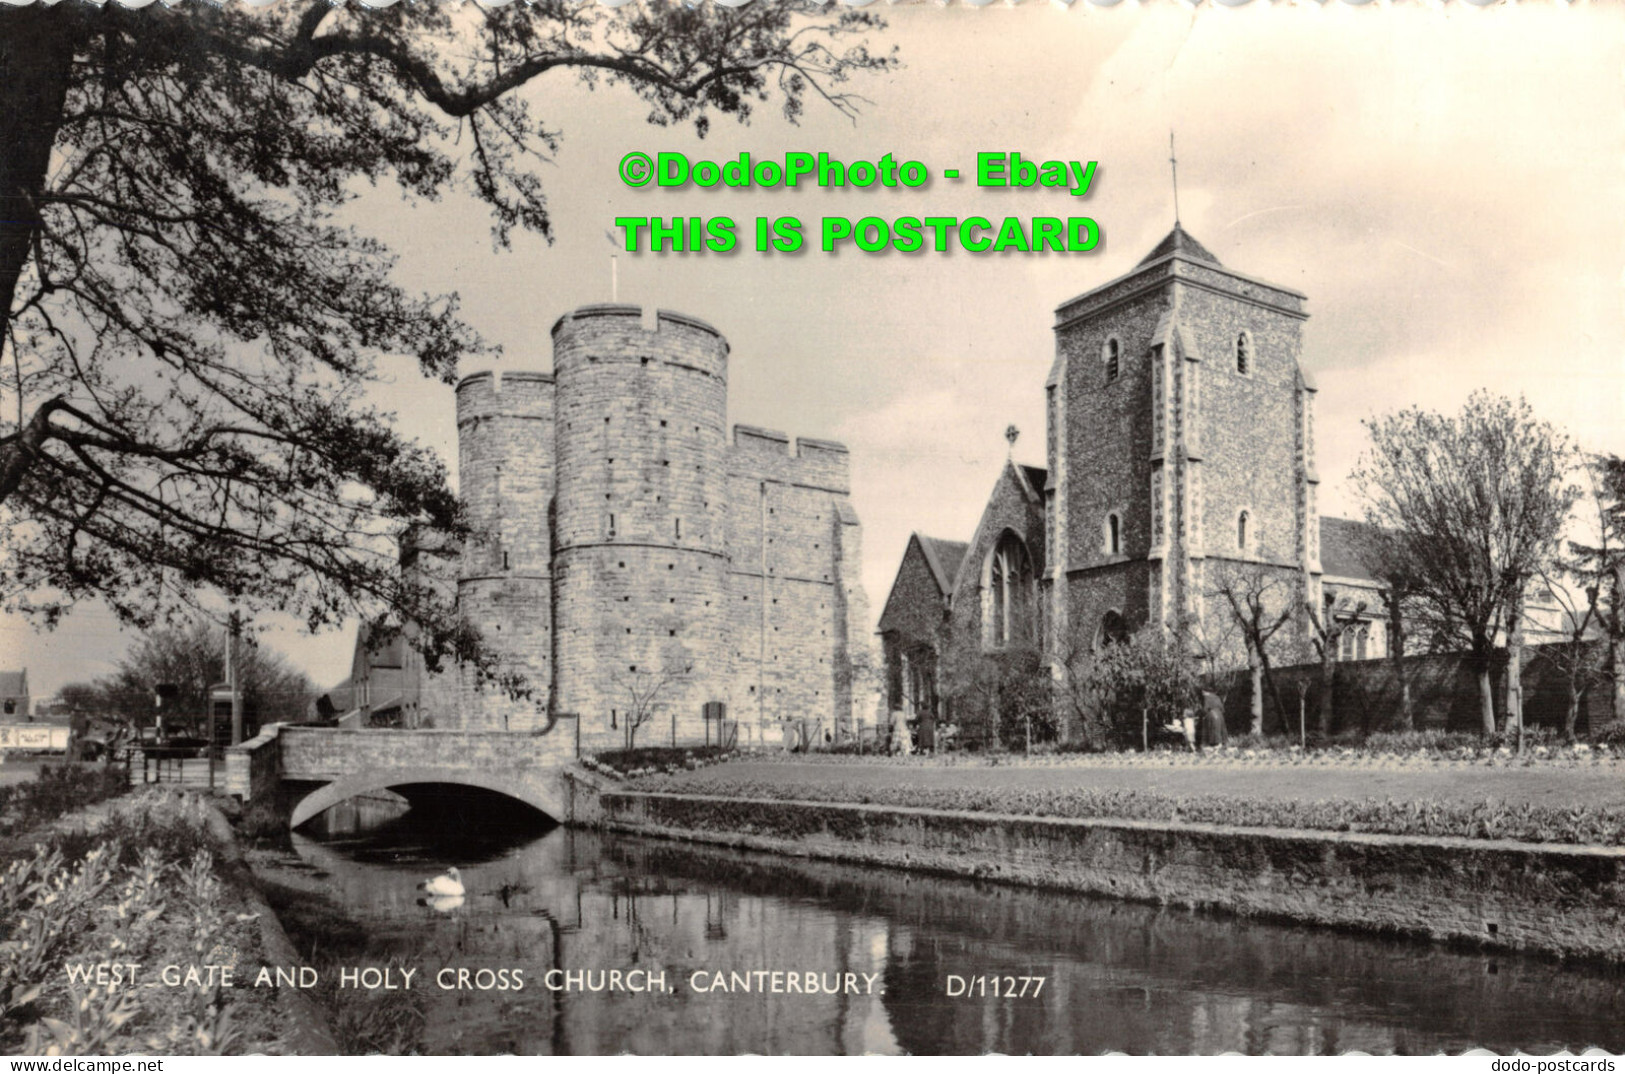 R437475 Canterbury. West Gate And Holly Cross Church. Norman. Shoesmith And Ethe - World